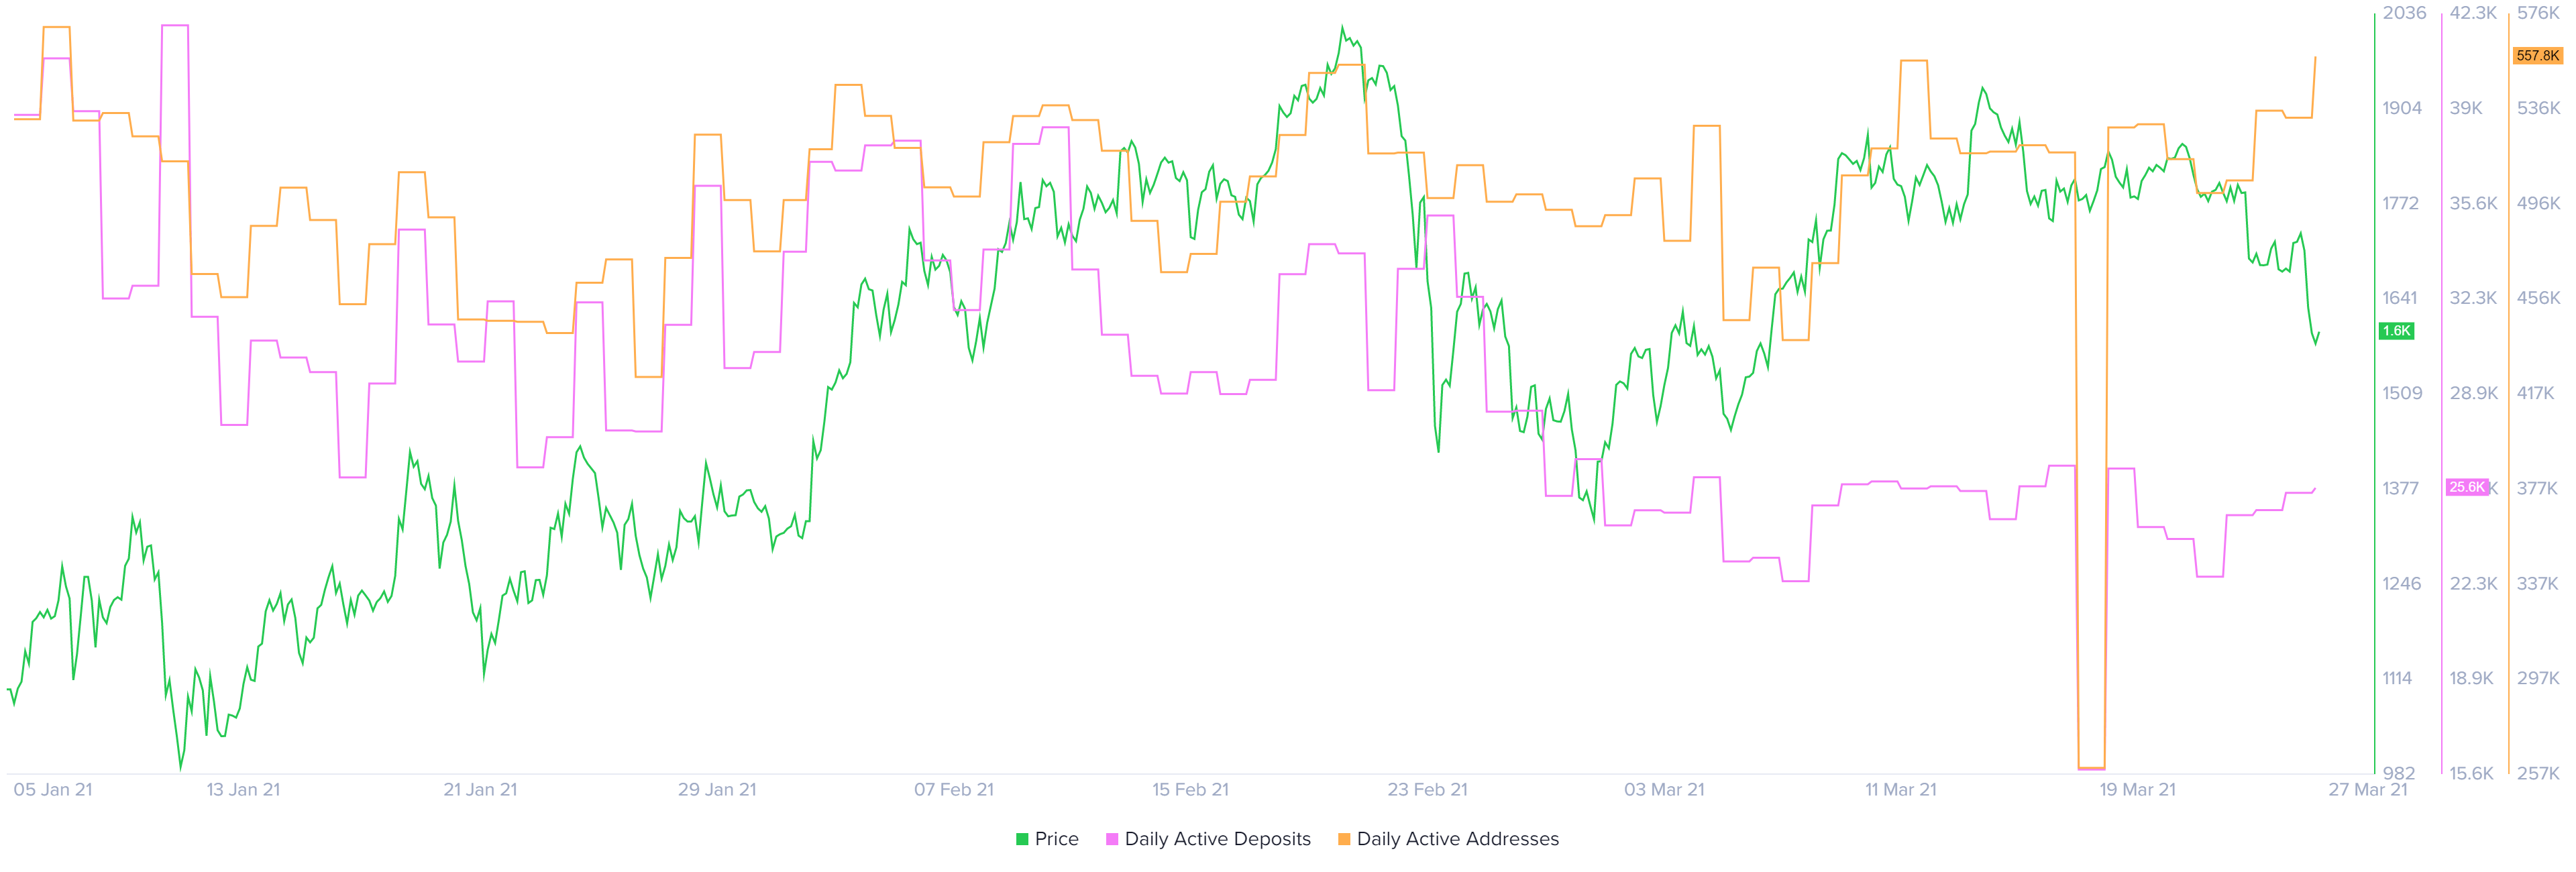 Ethereum Daily Active Addresses and Daily Active Deposit chart